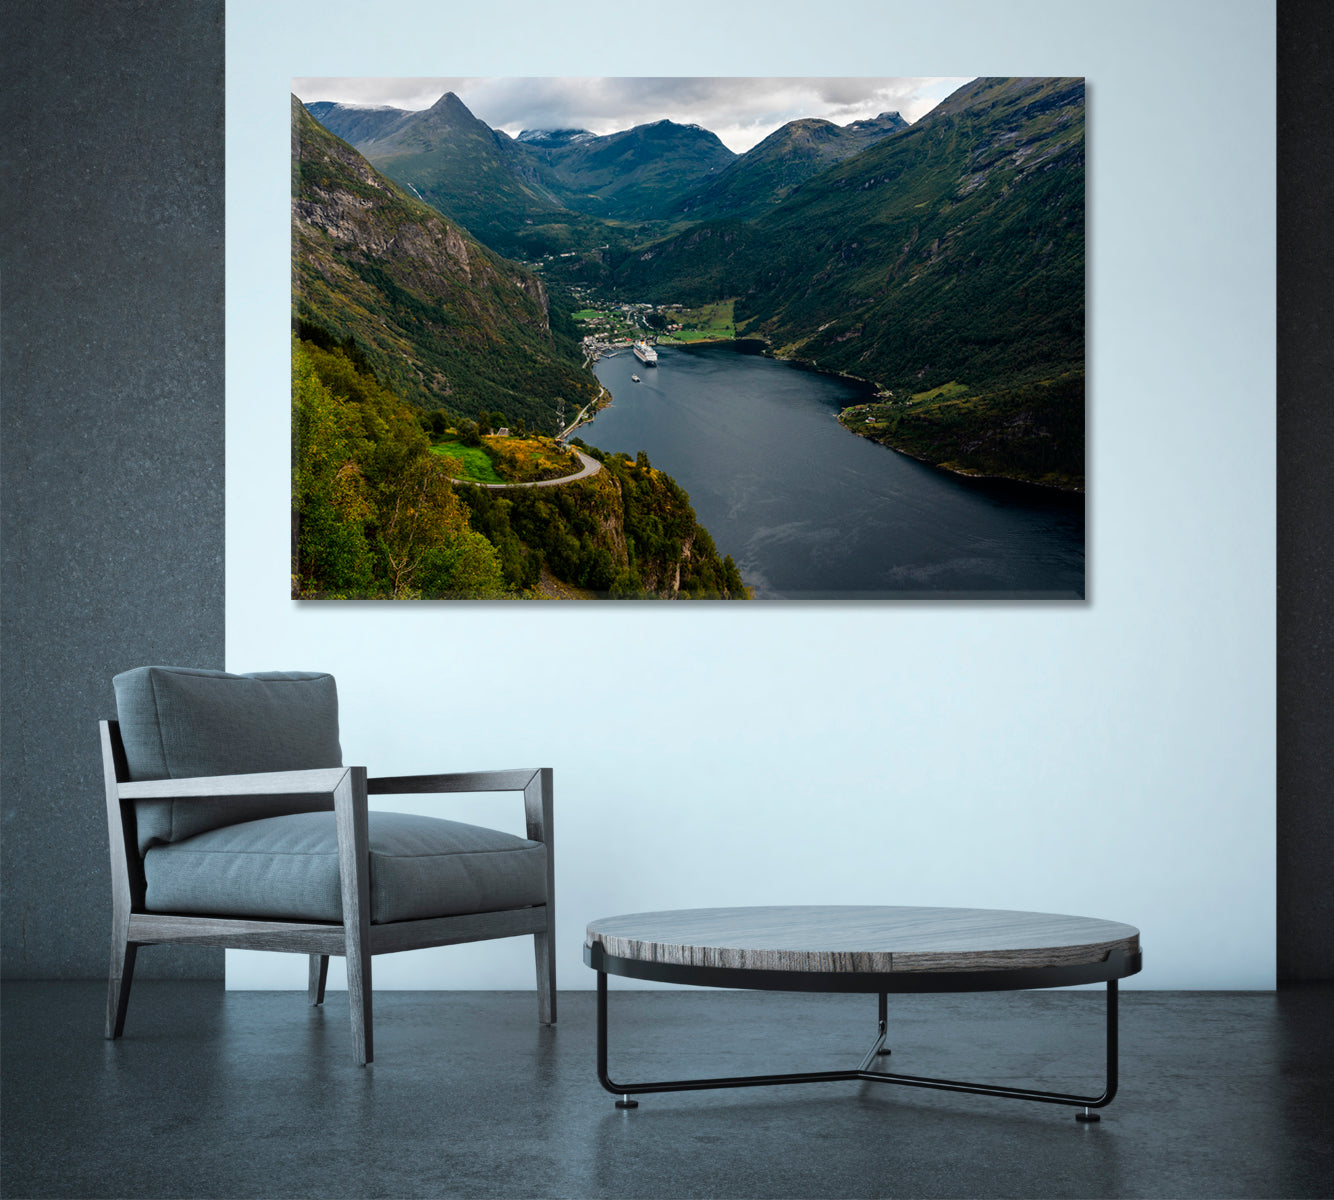 Cruise Liner In Geiranger Fjord Norway Canvas Print-Canvas Print-CetArt-1 Panel-24x16 inches-CetArt